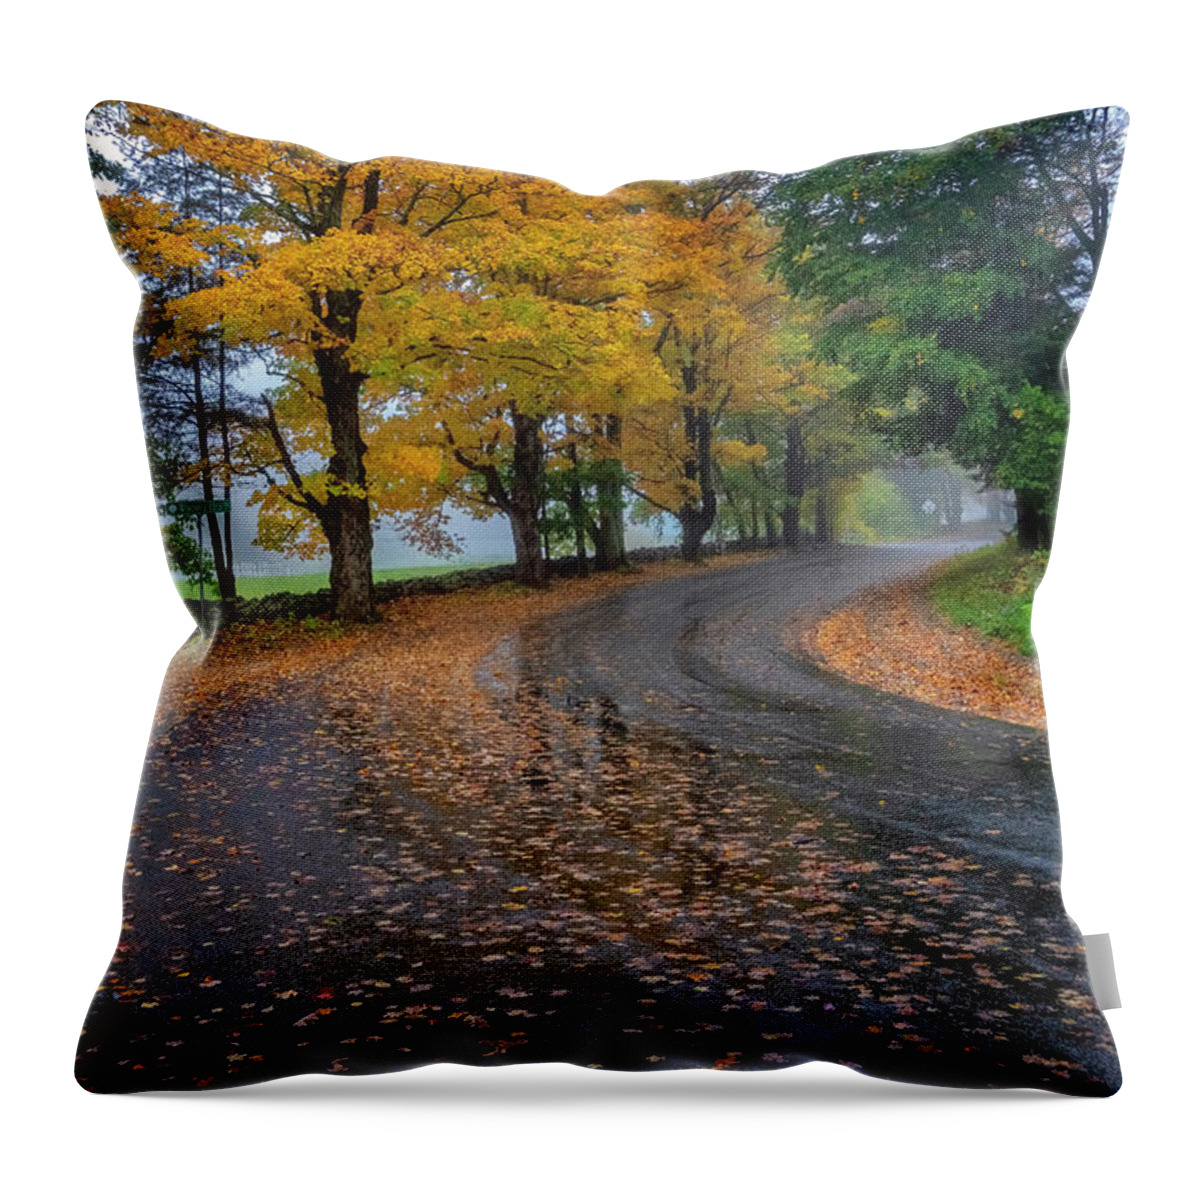 Spofford Lake New Hampshire Throw Pillow featuring the photograph Autumn Road by Tom Singleton